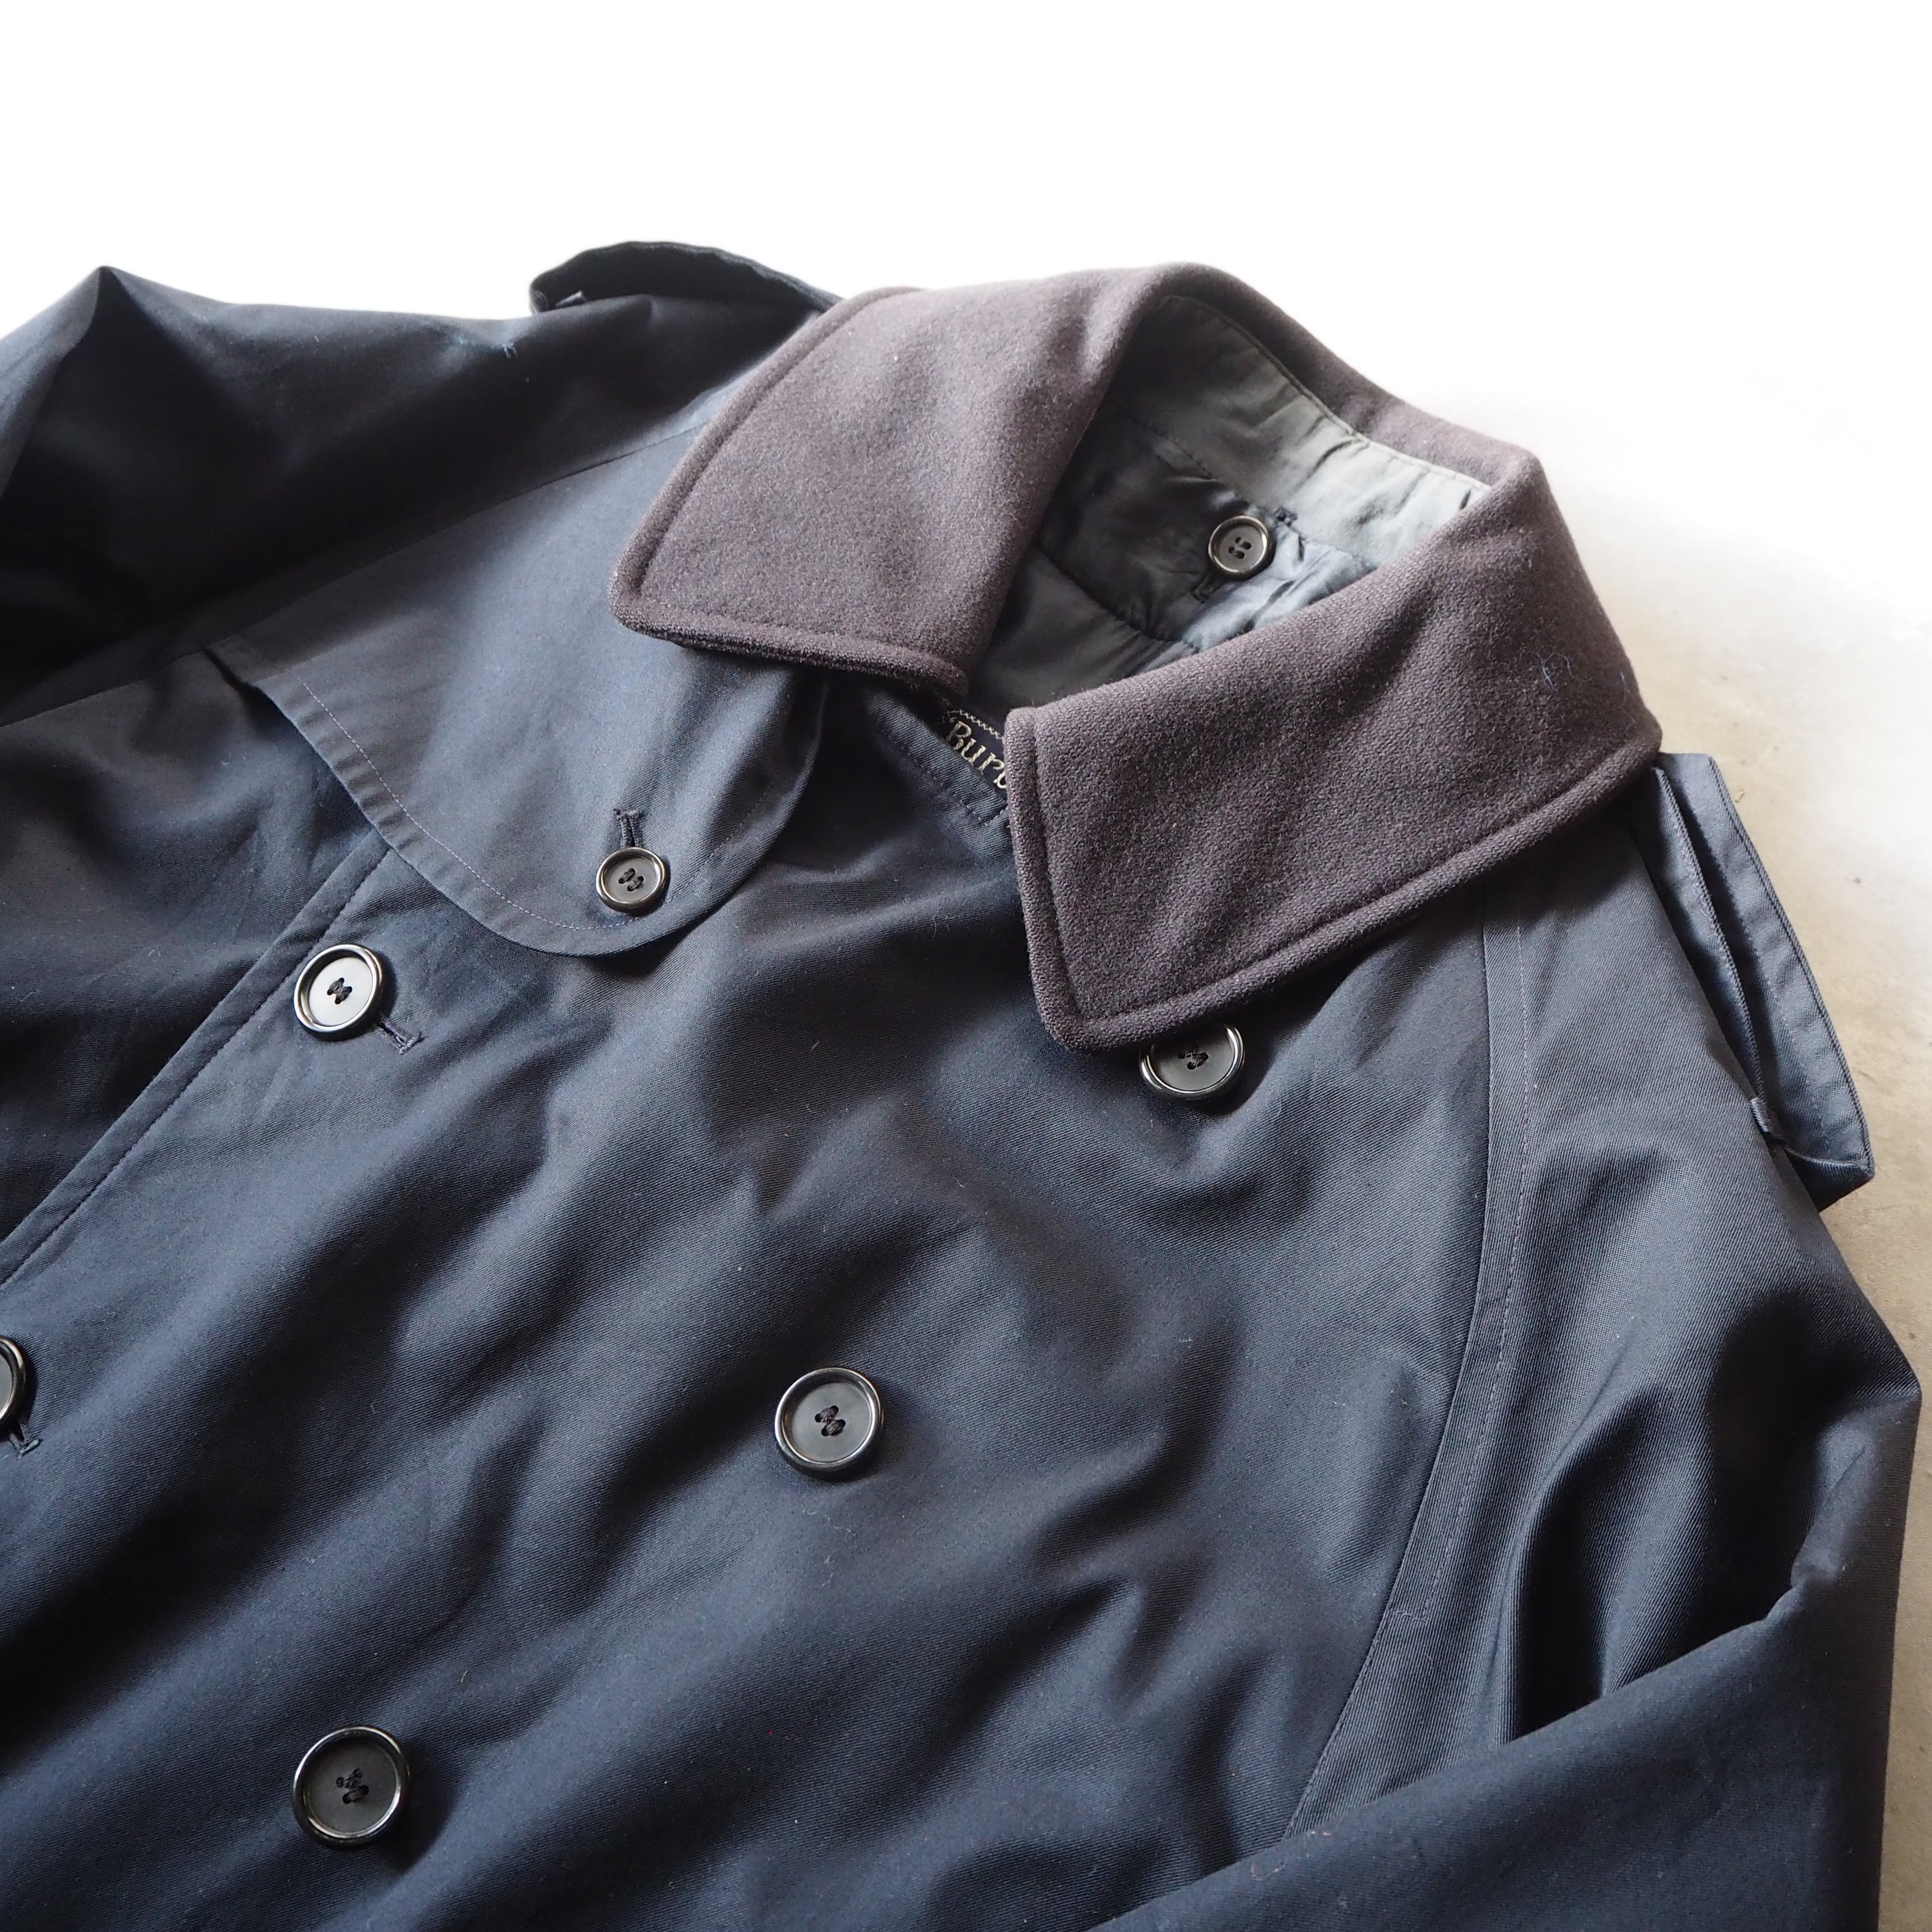 80s “Burberrys” 一枚袖 trench coat with liner navy color made in